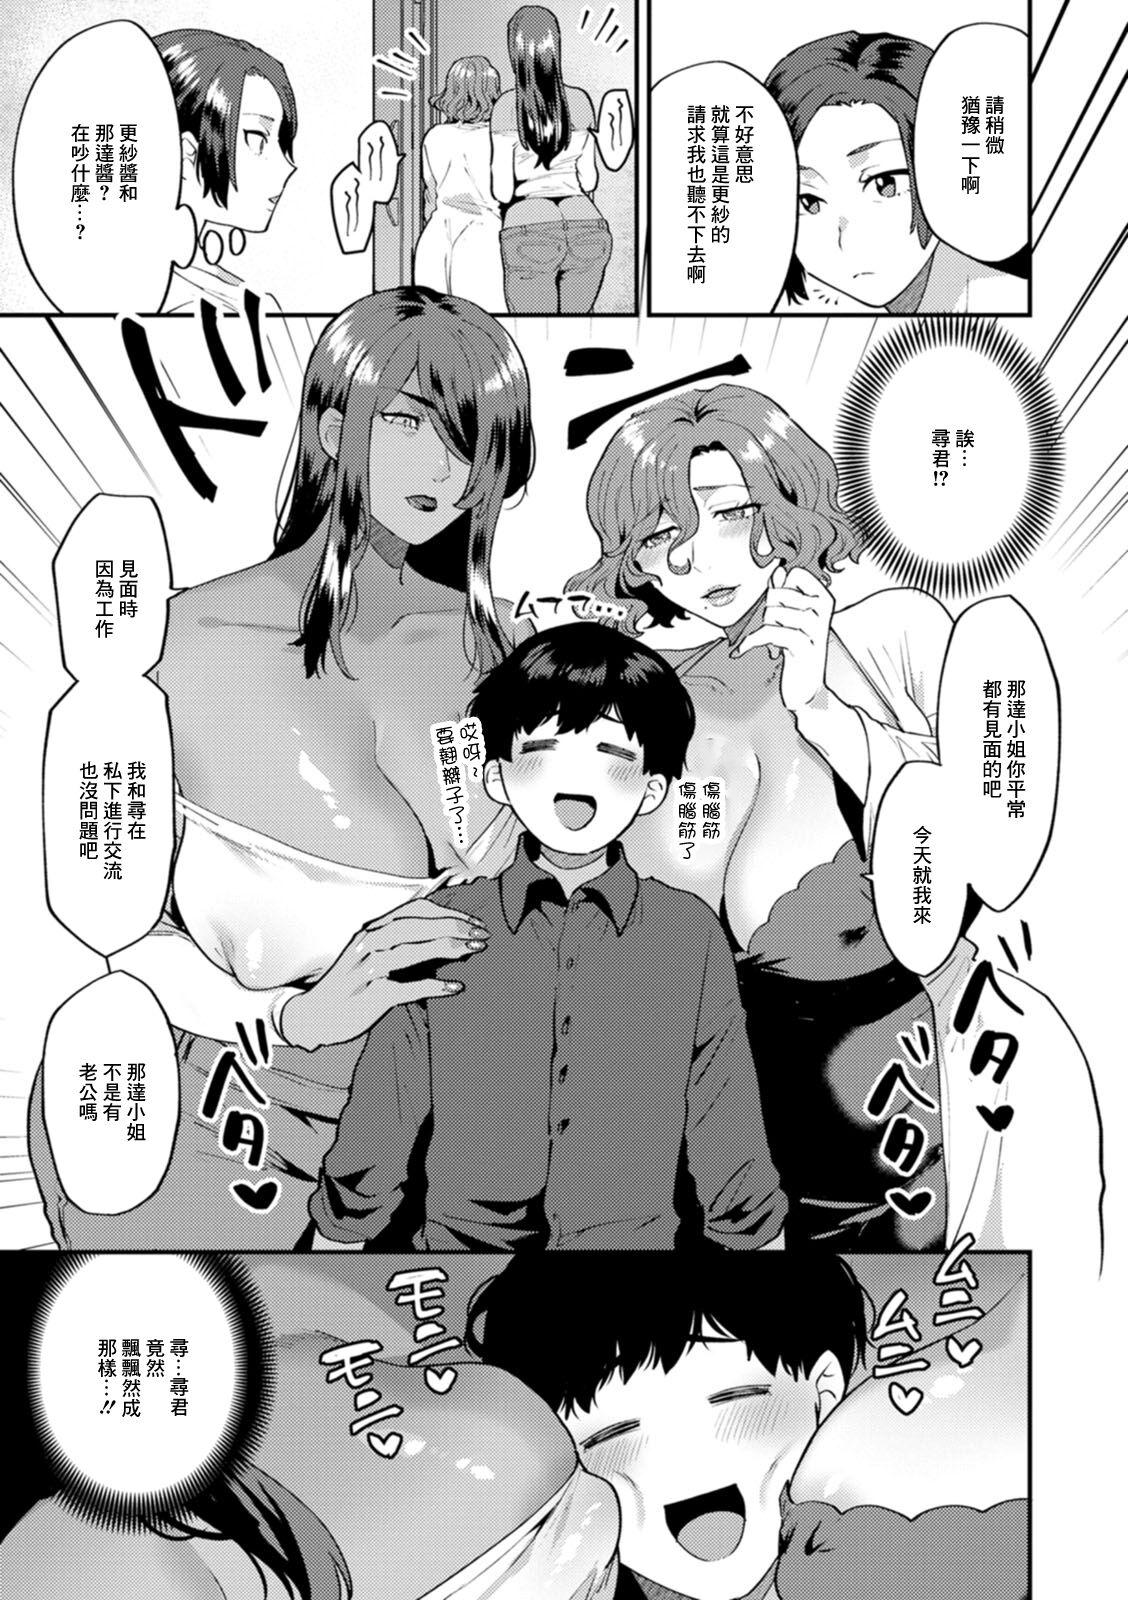 Whipping Tantasion no Rinjin Ch. 4 Curious - Page 7